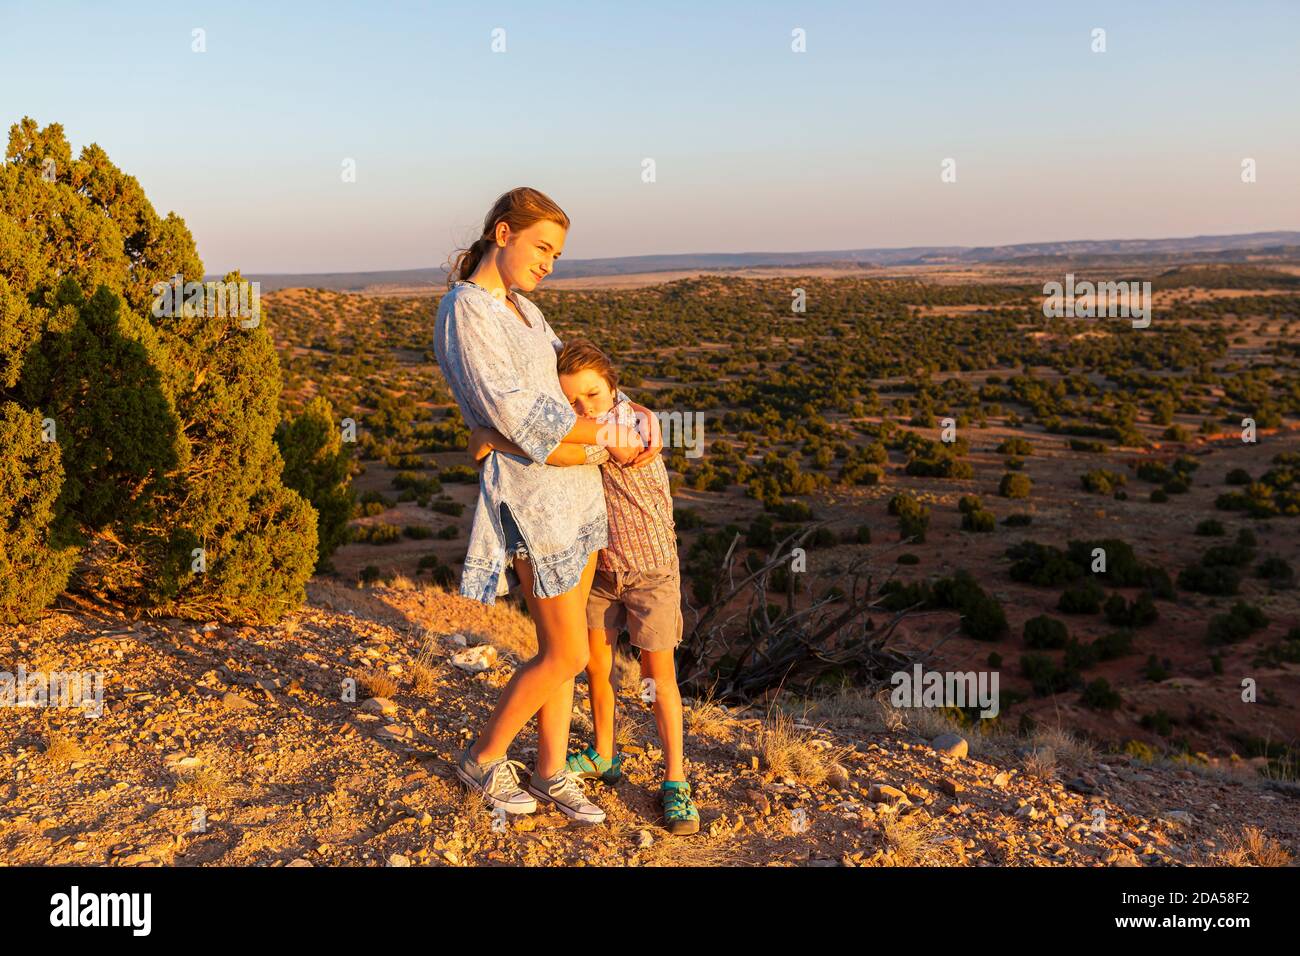 Teenage girl embracing her younger brother in the Galisteo Basin, Santa Fe, NM. Stock Photo